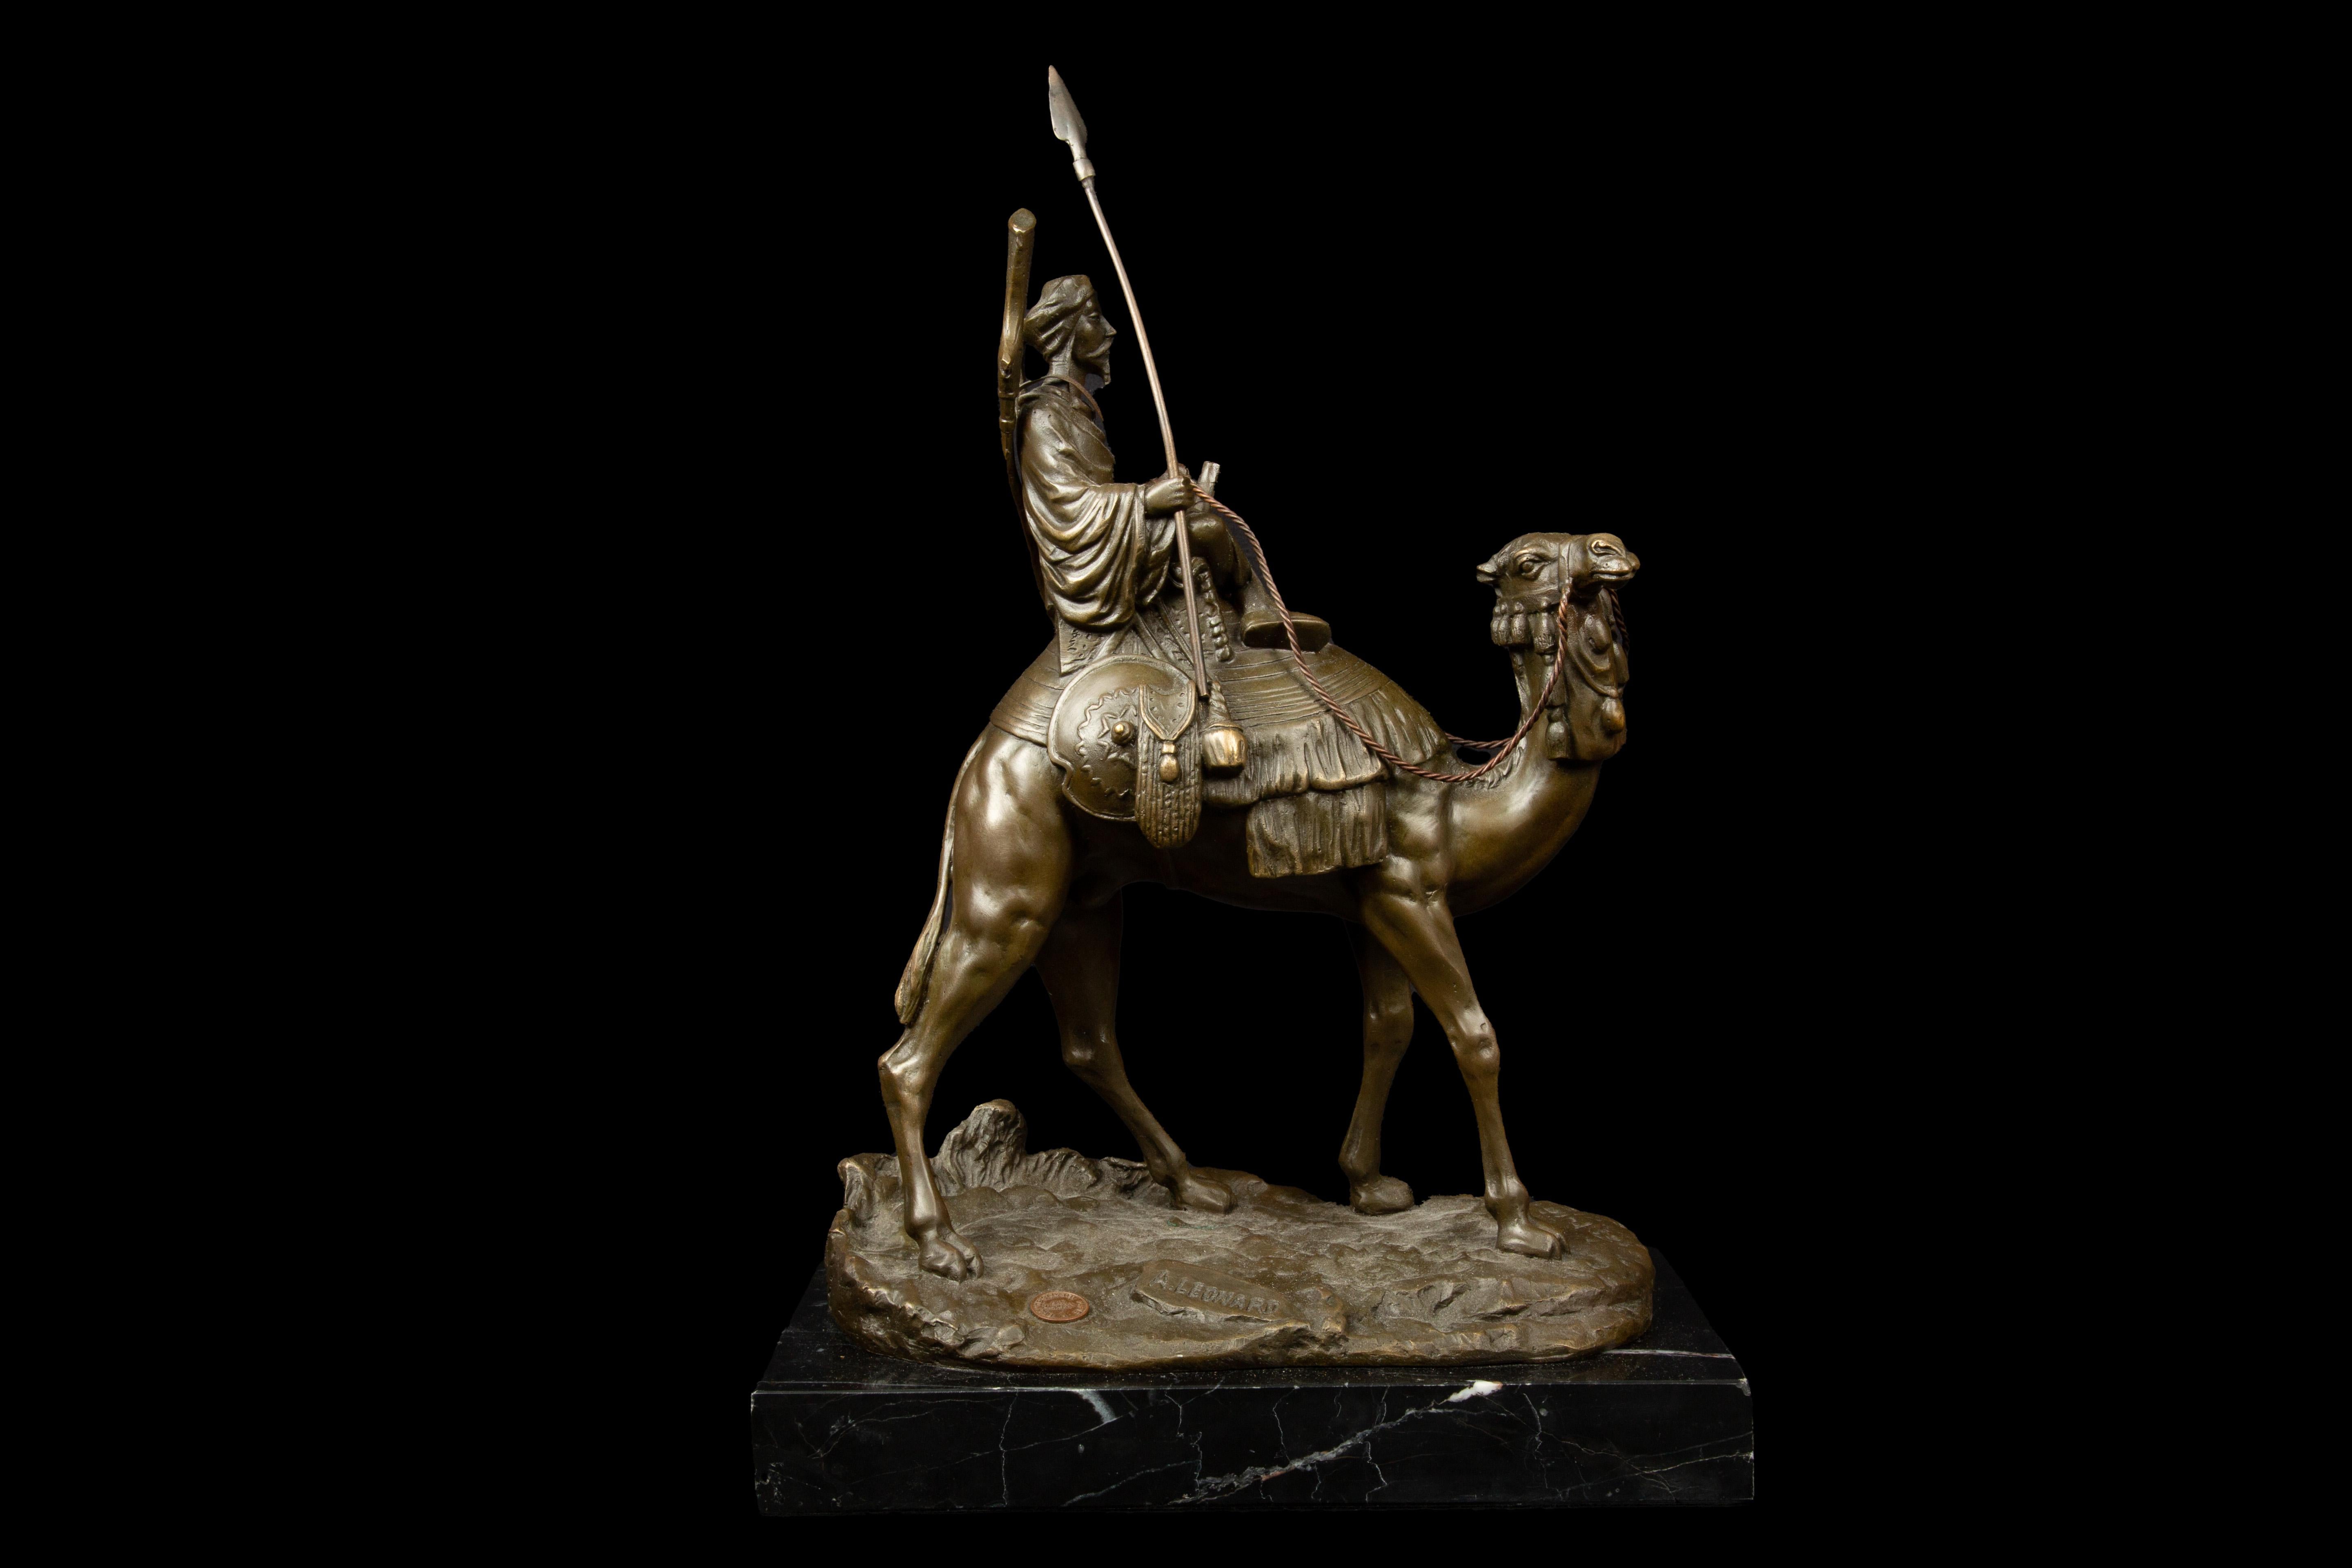 Agathon Léonard (1841-1923) Bedouin on a Camel mounted on a black marble base. This exceptional sculpture, cast in bronze with a captivating brown patina, showcases Léonard's unparalleled talent and artistic vision. Expertly crafted, this artwork